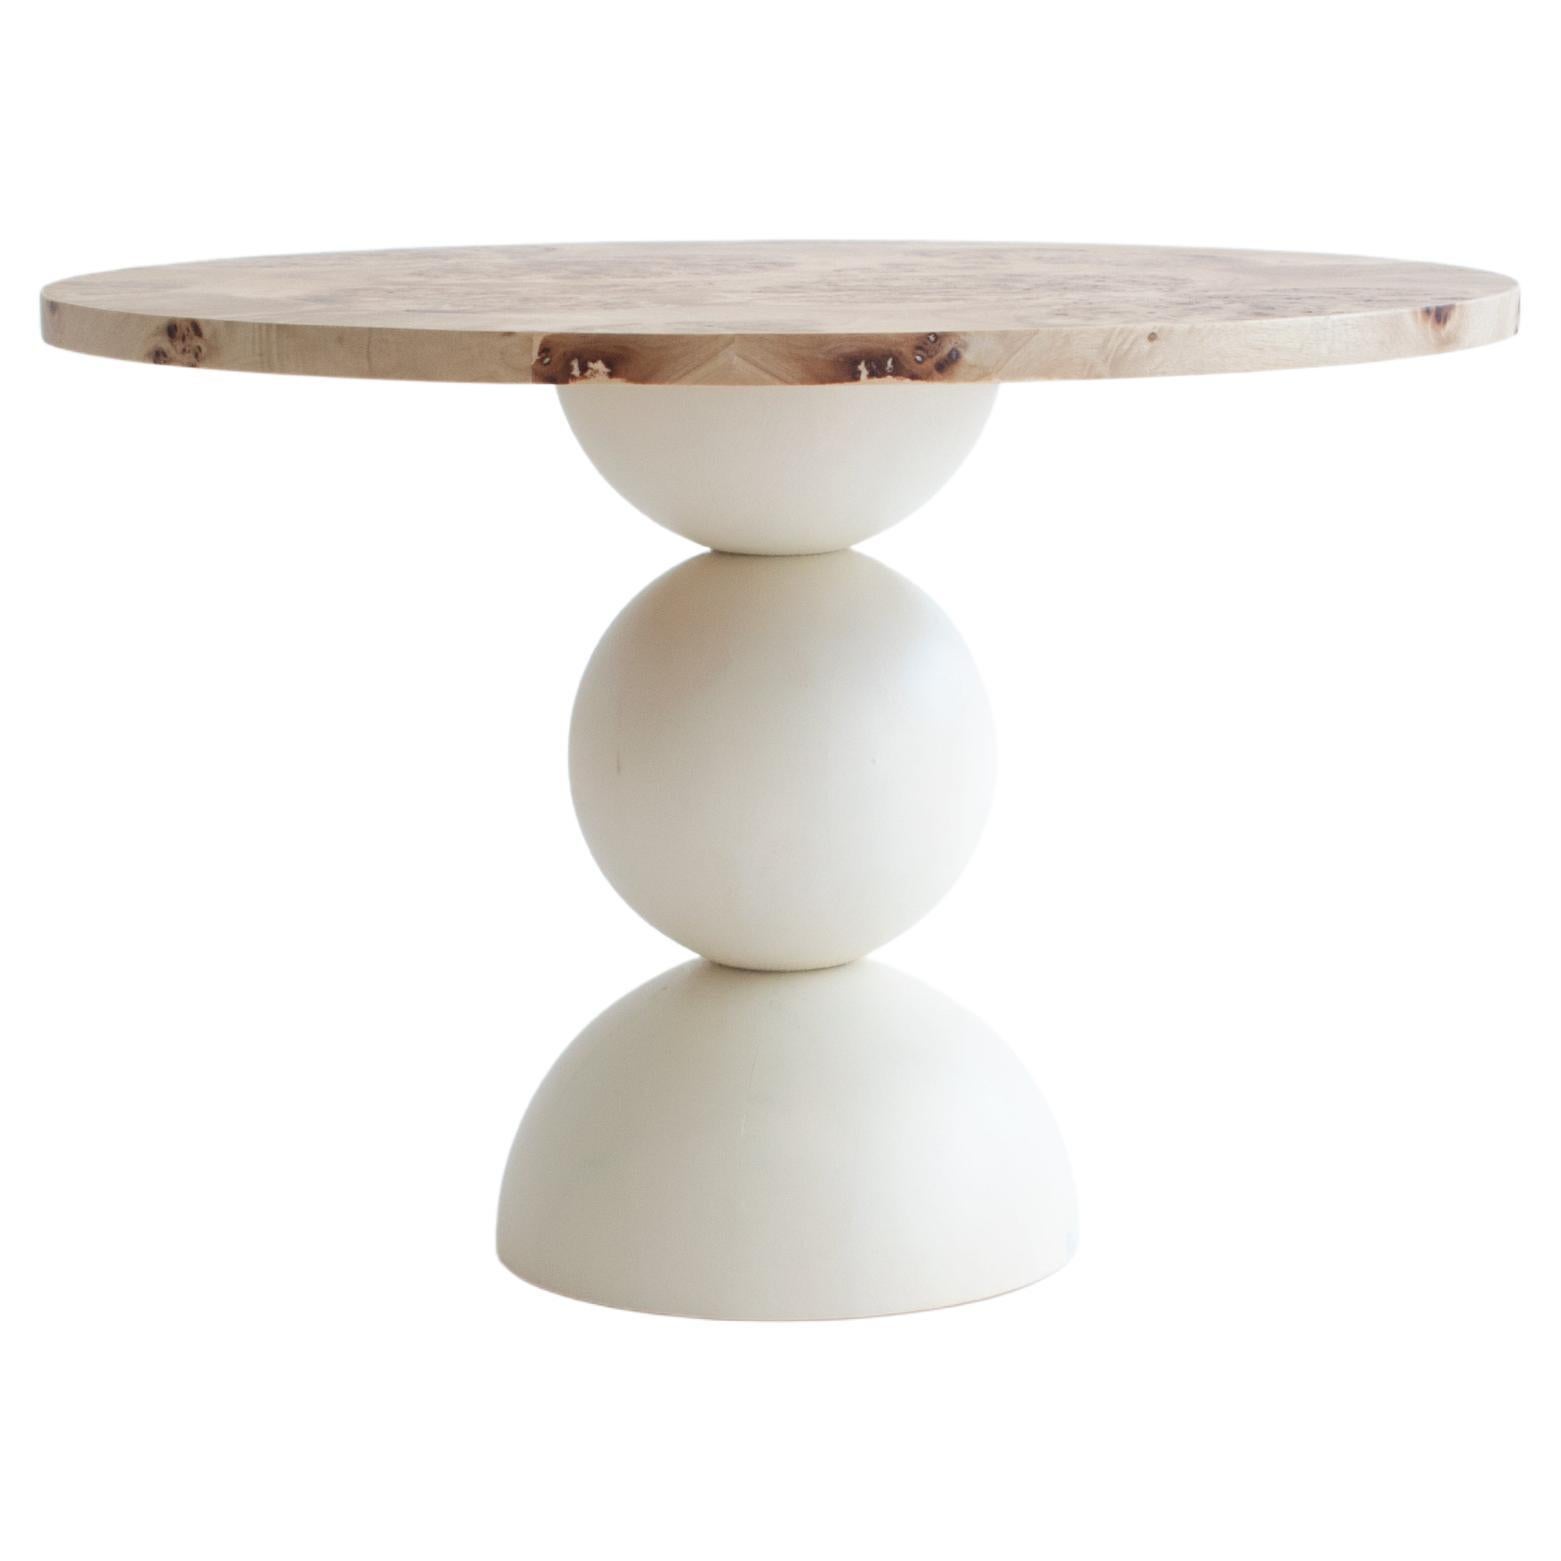 Mapa burl top surface and Swedish pine solid wood half and full spheres transparently matt lacquered. (Available in more colors and veneer types)

The concept for this piece is based on the idea of the circle being perceived from two angles. This